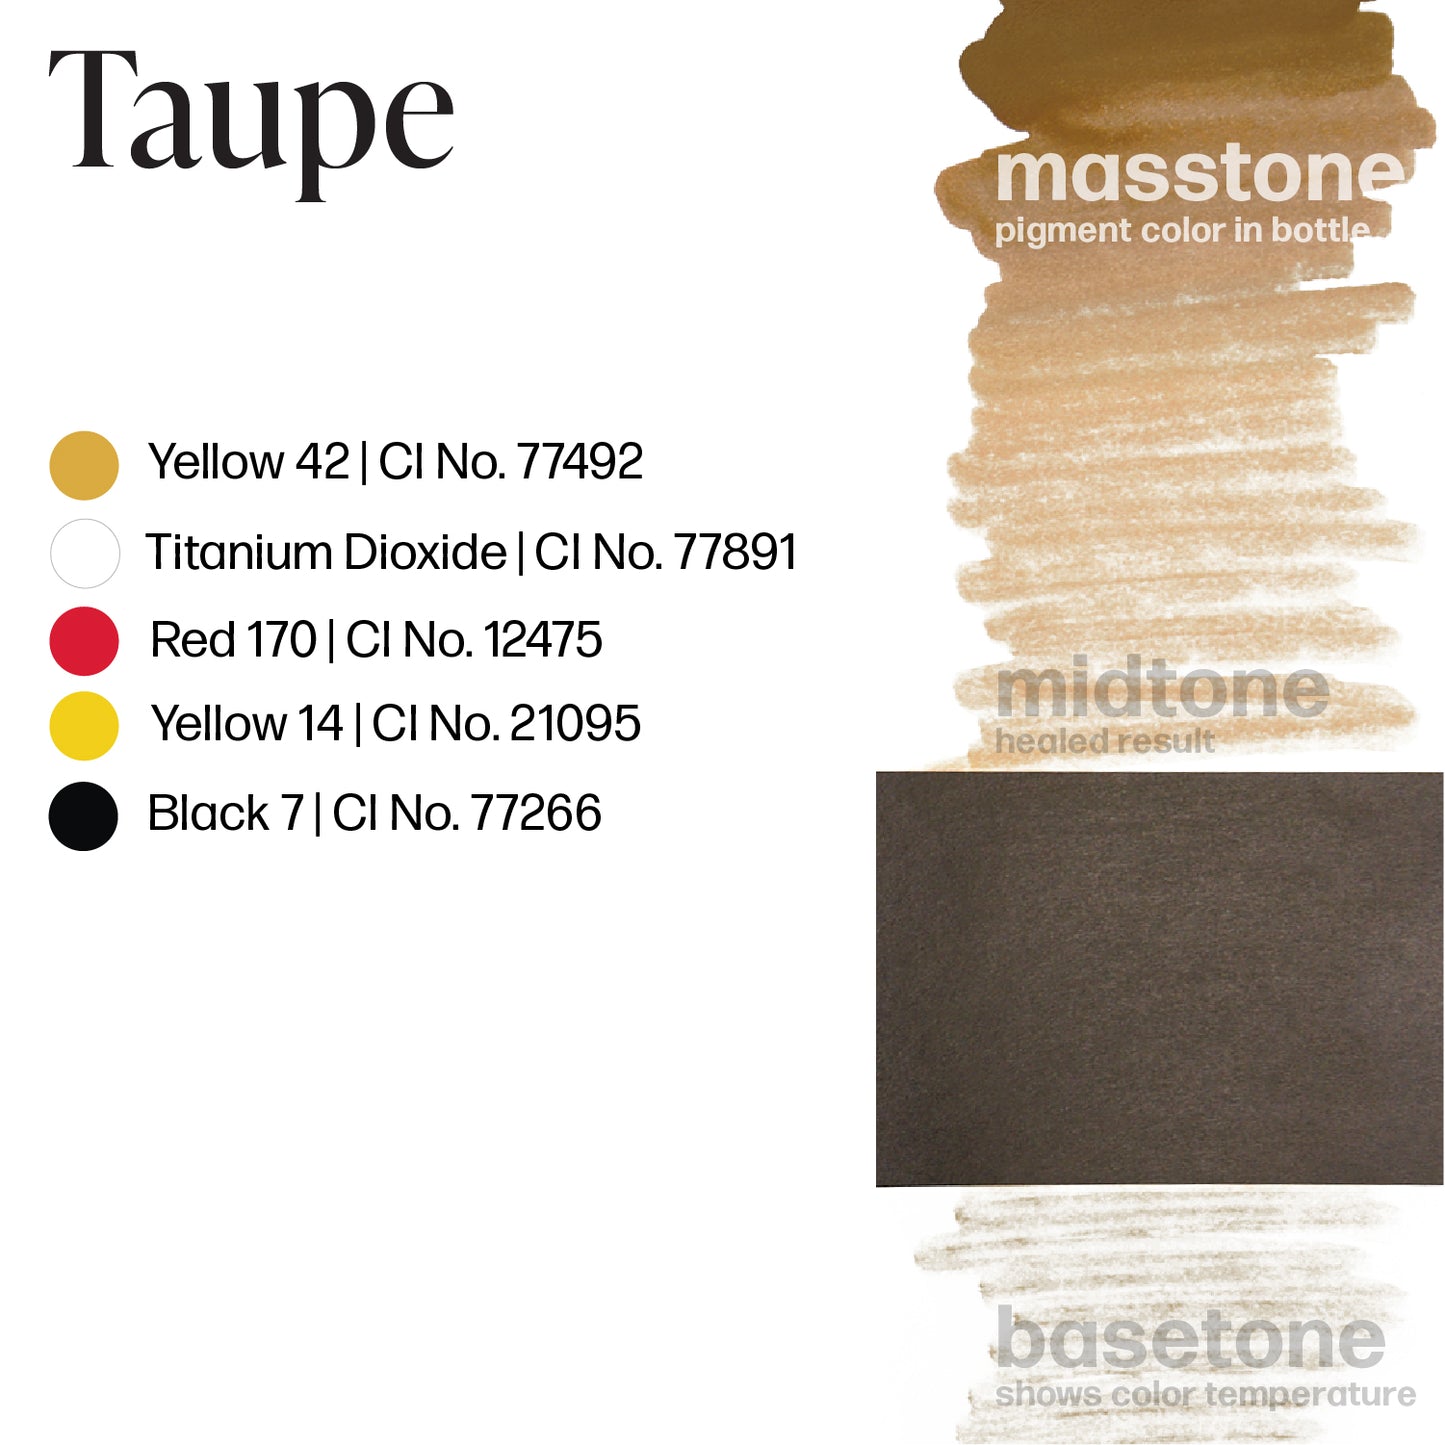 Perma Blend Taupe